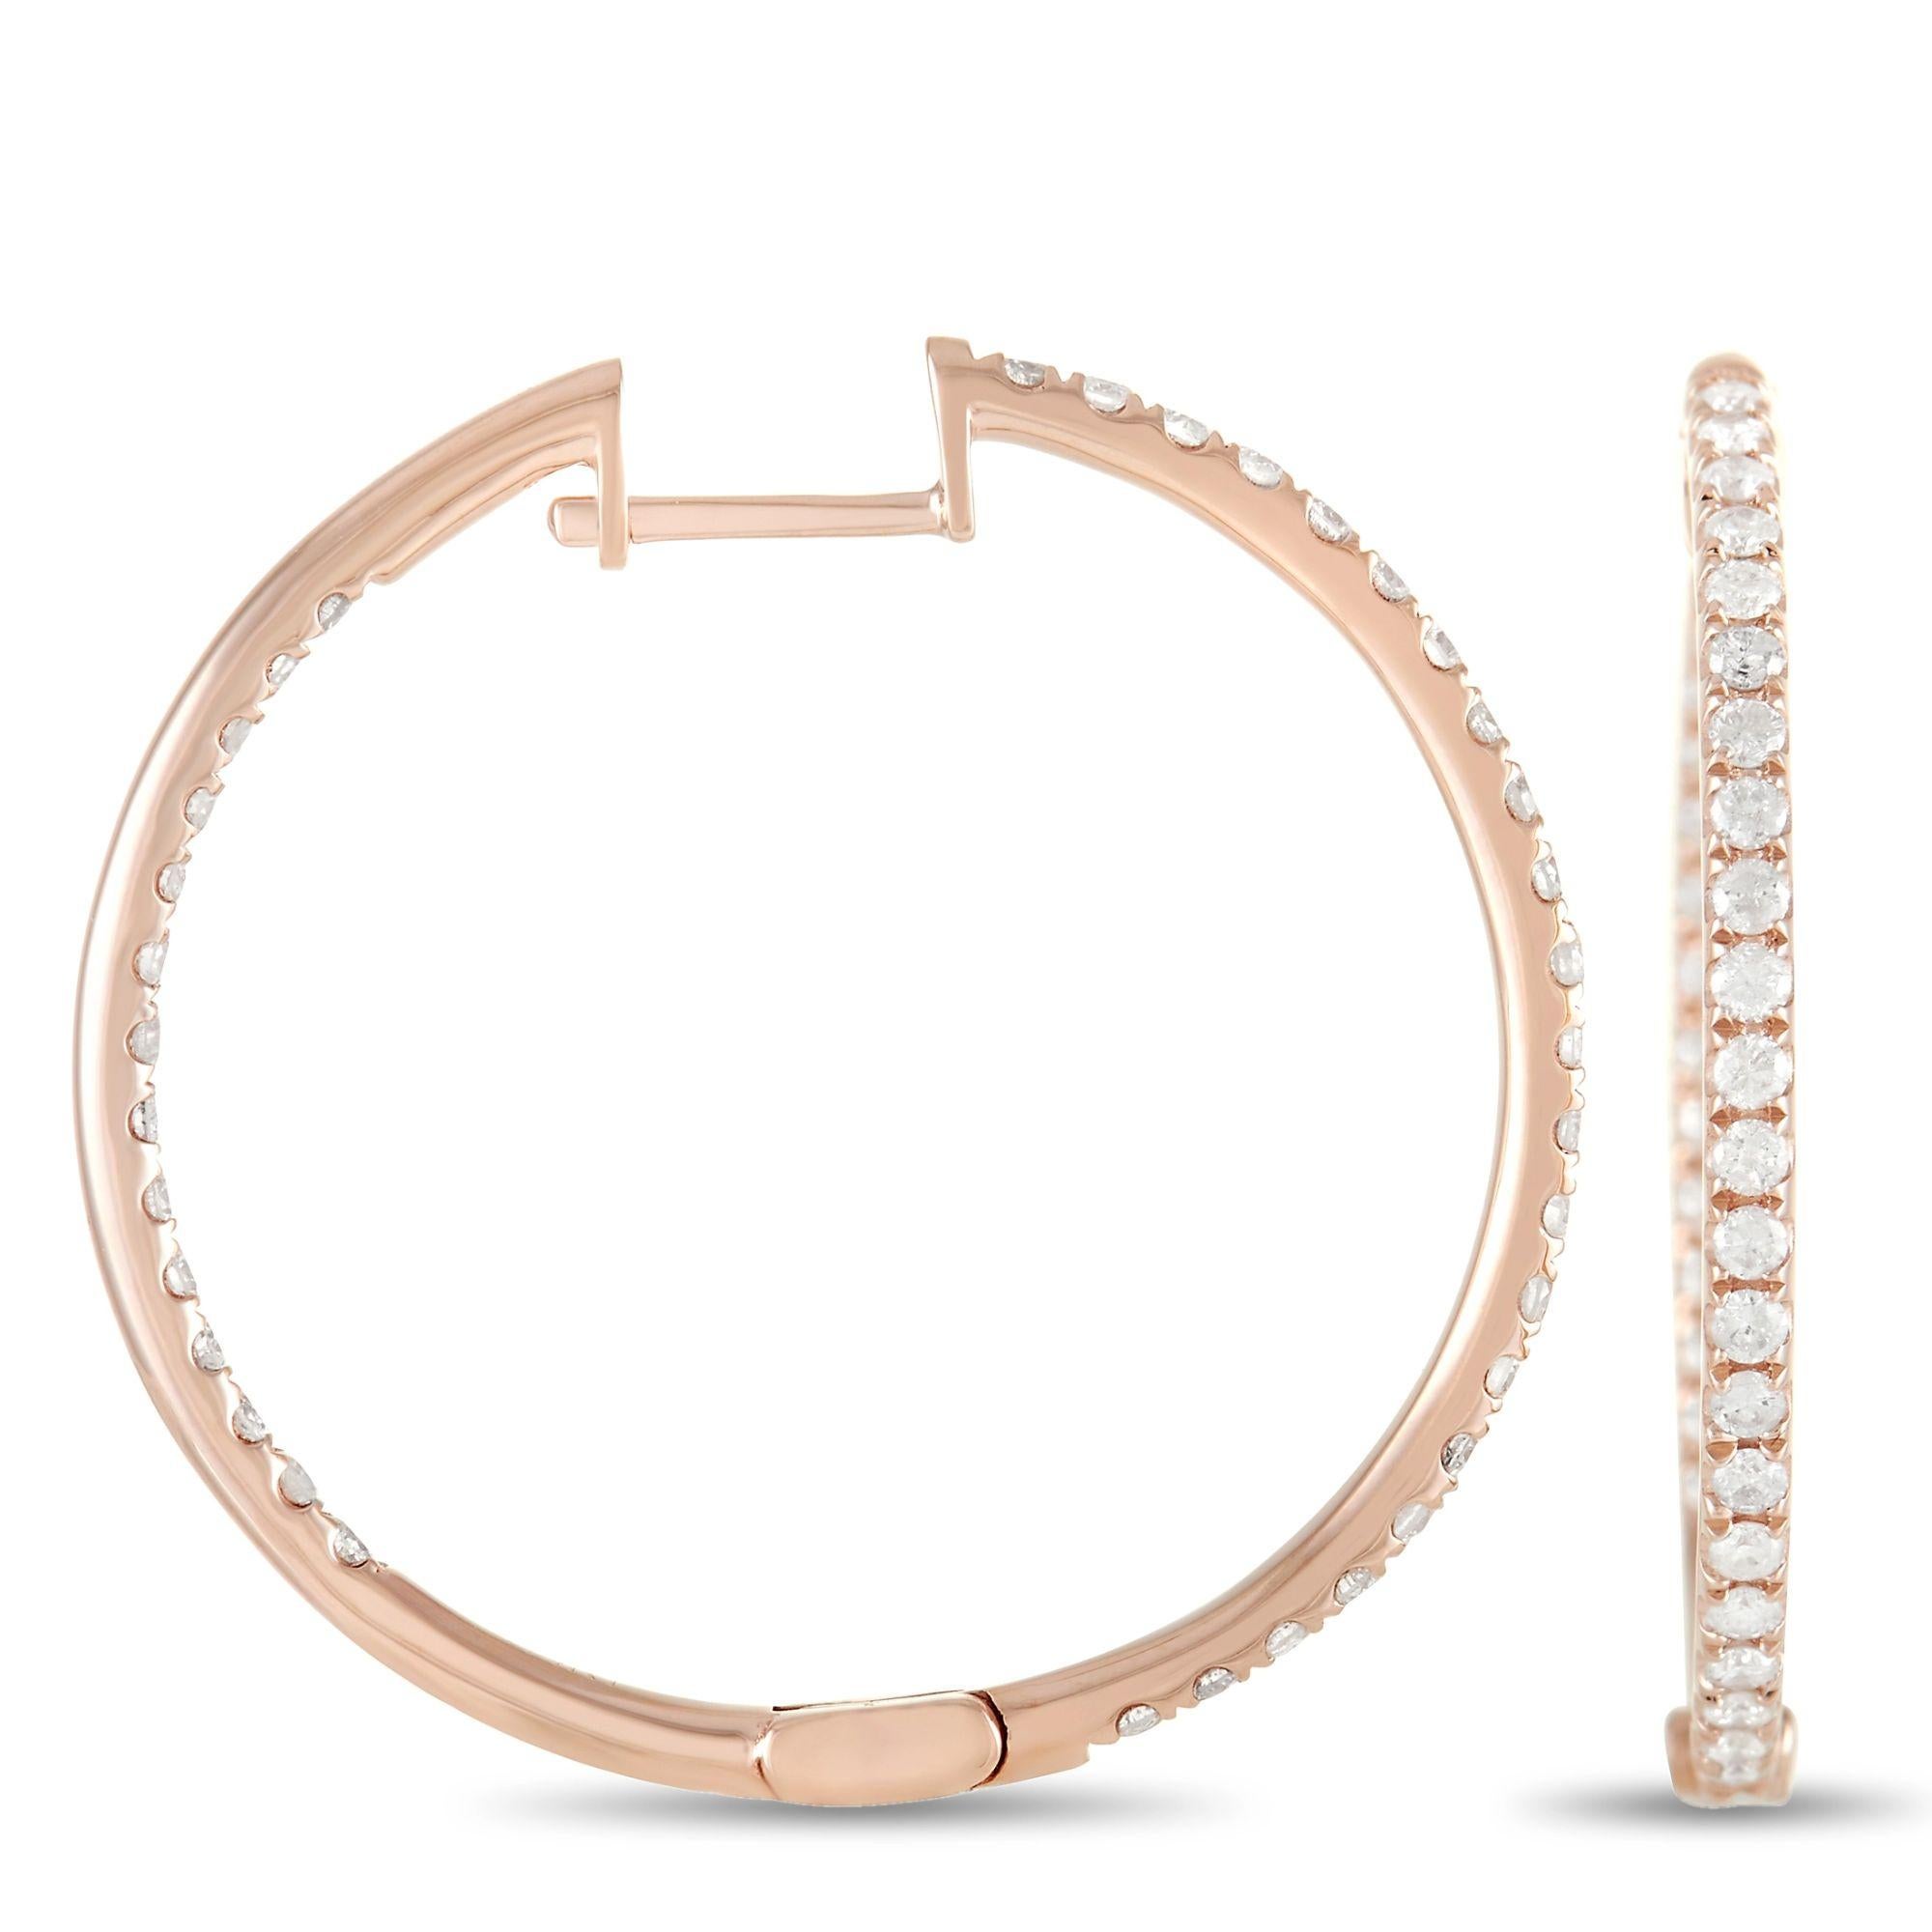 These stylish hoop earrings are poised to make a sparkling statement. Each one of these bold 1” round hoops is made from opulent 14K Rose Gold and comes complete with a series of shimmering round-cut diamonds, which together possess a total weight